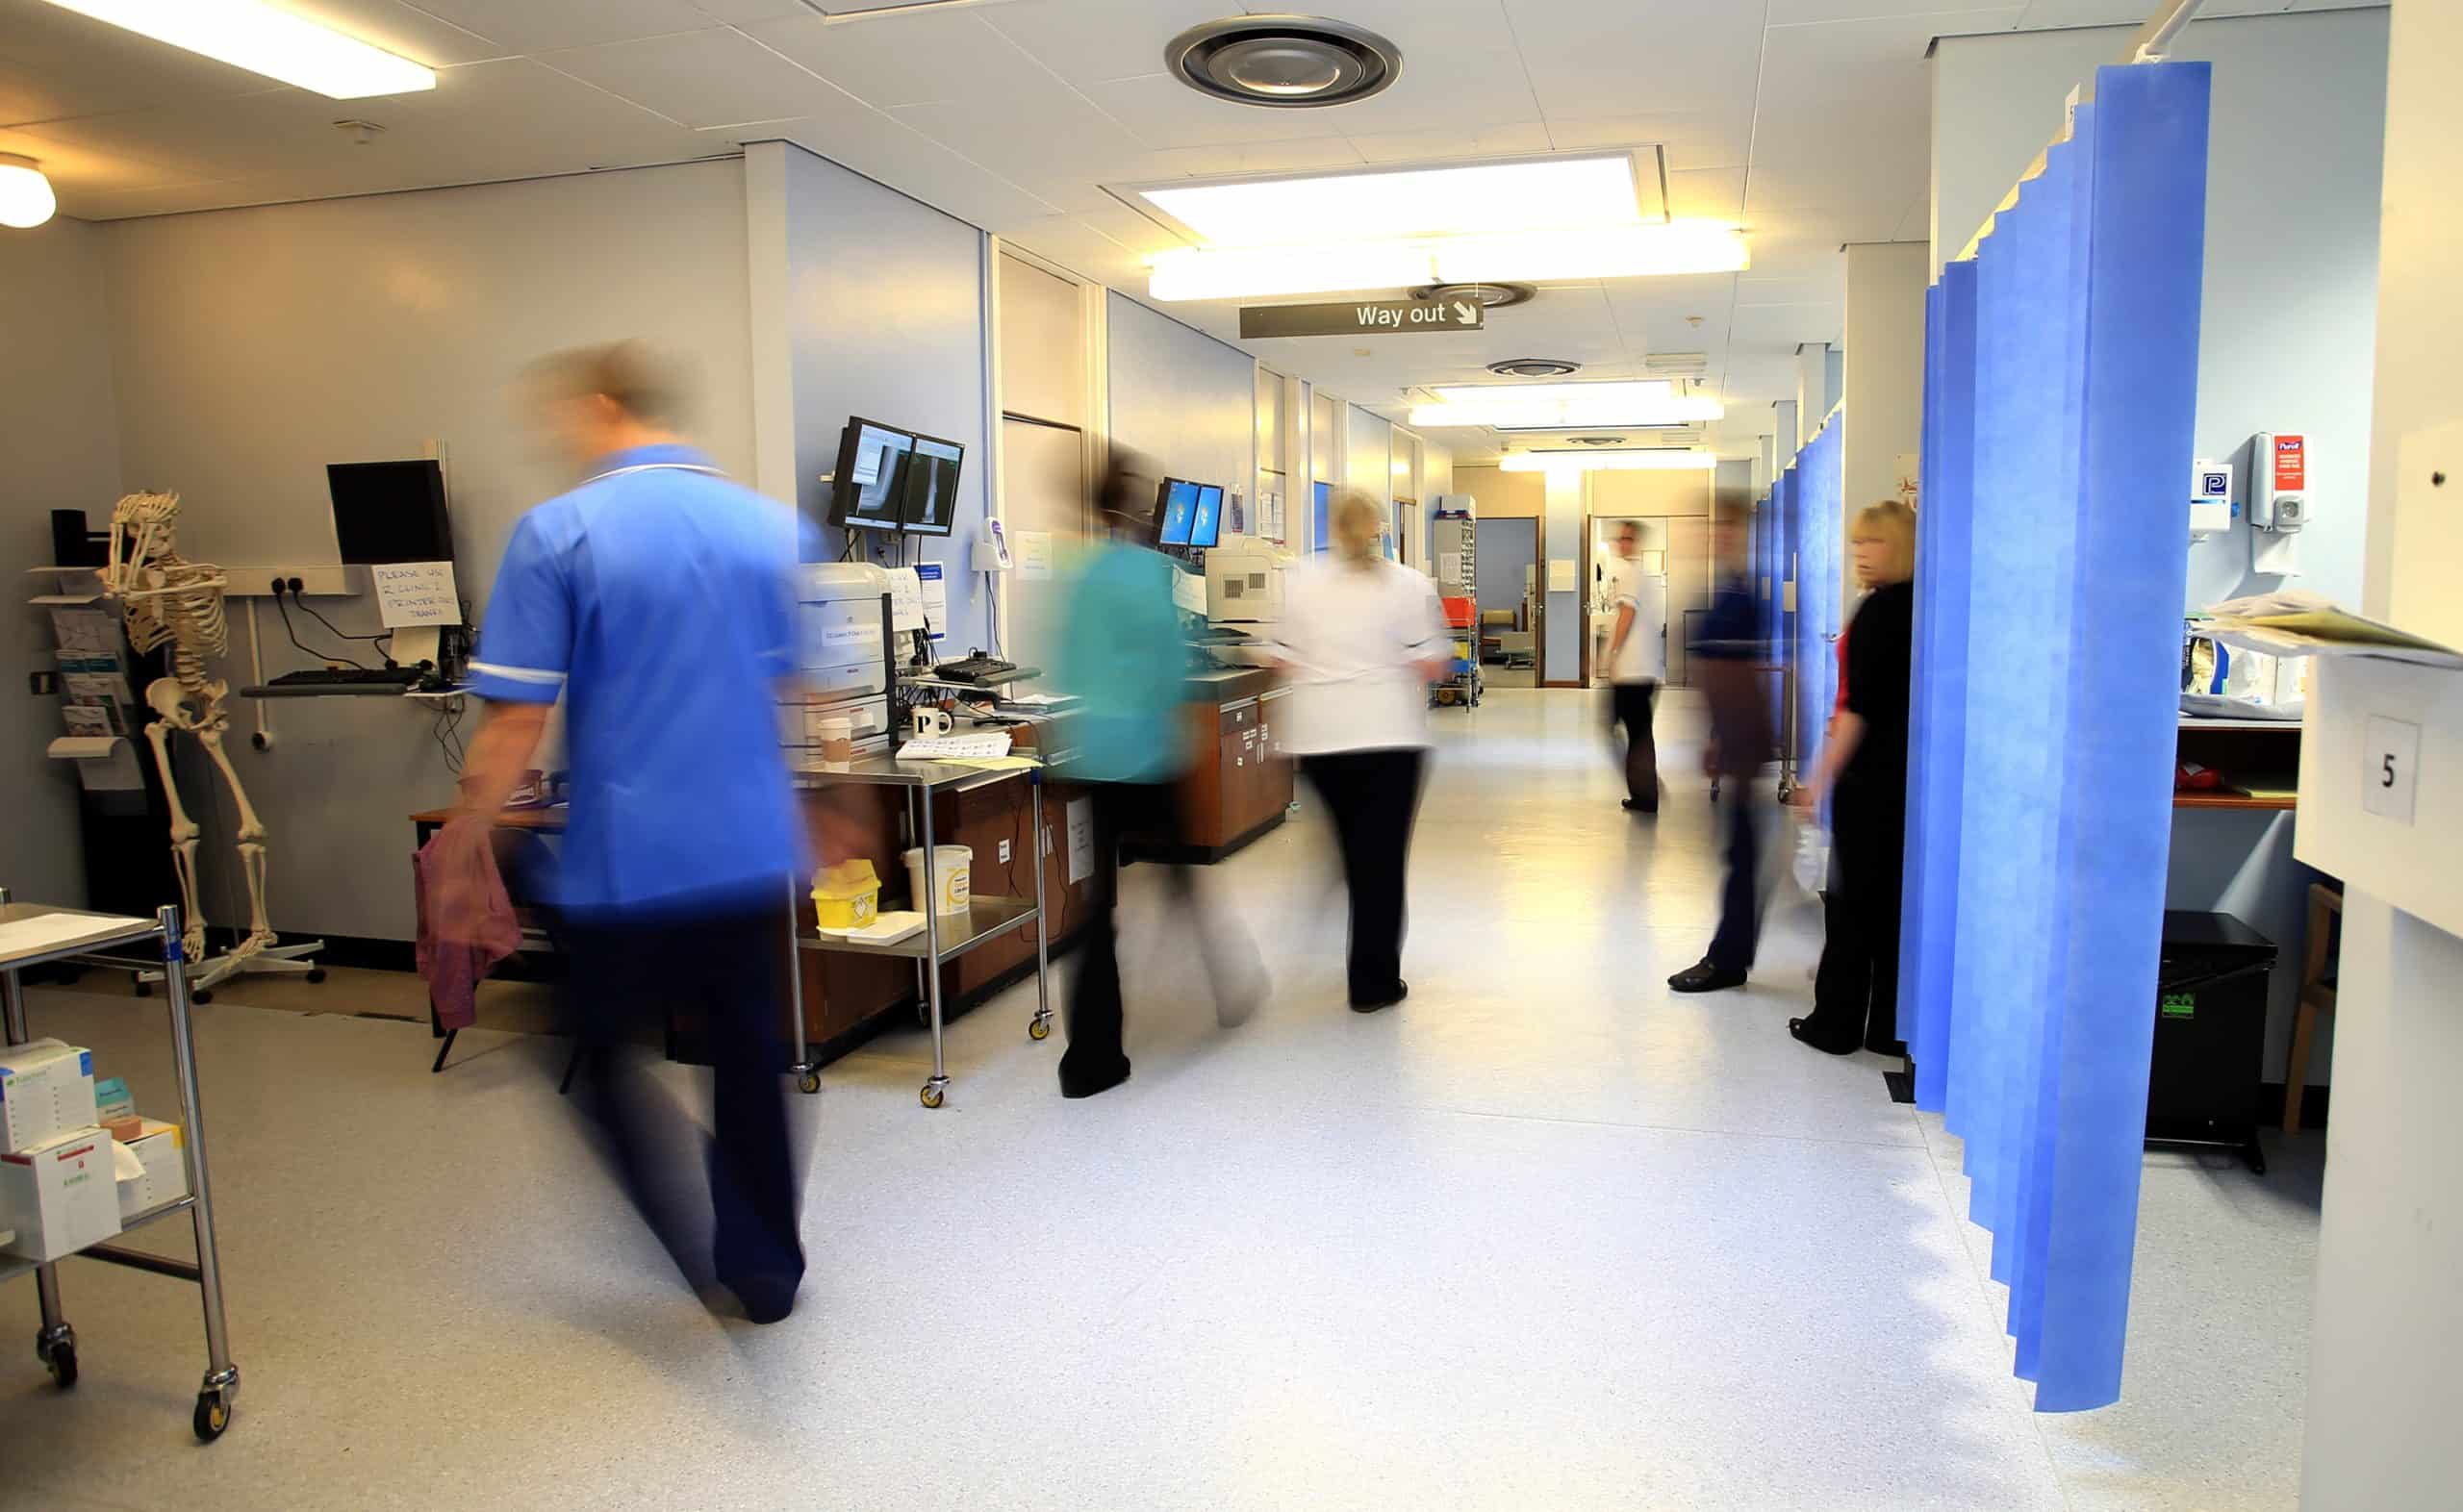 Record 54,532 people waited over 12 hours in A&E departments last month